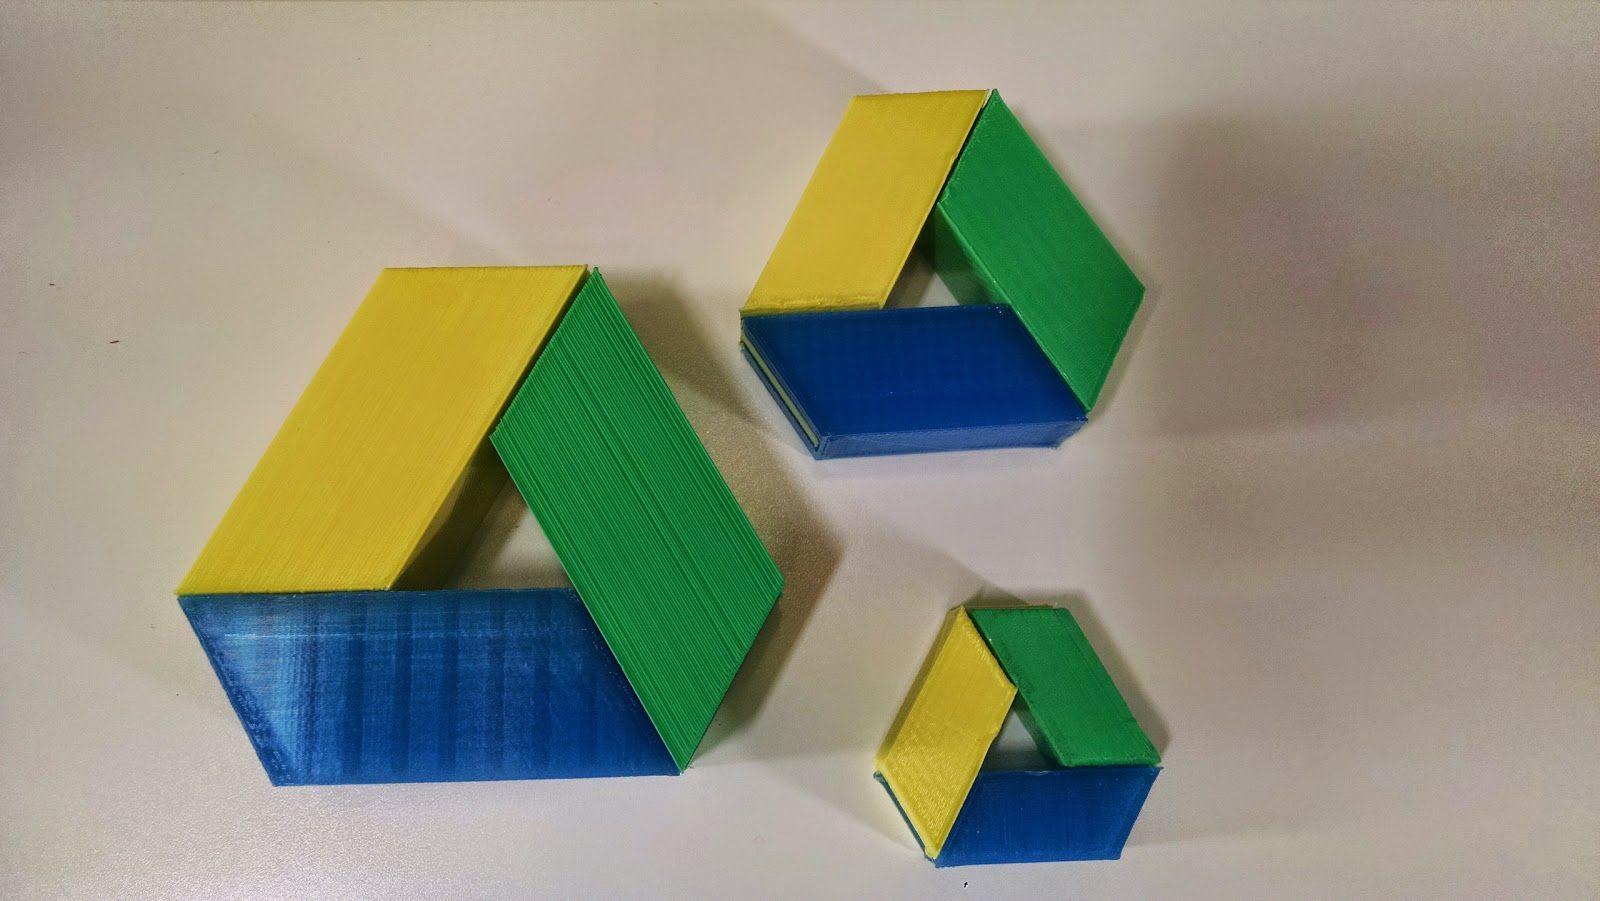 Green with Yellow Triangle Logo - Maker Club: Multi-Color 3D Printing Using Snap Together Parts